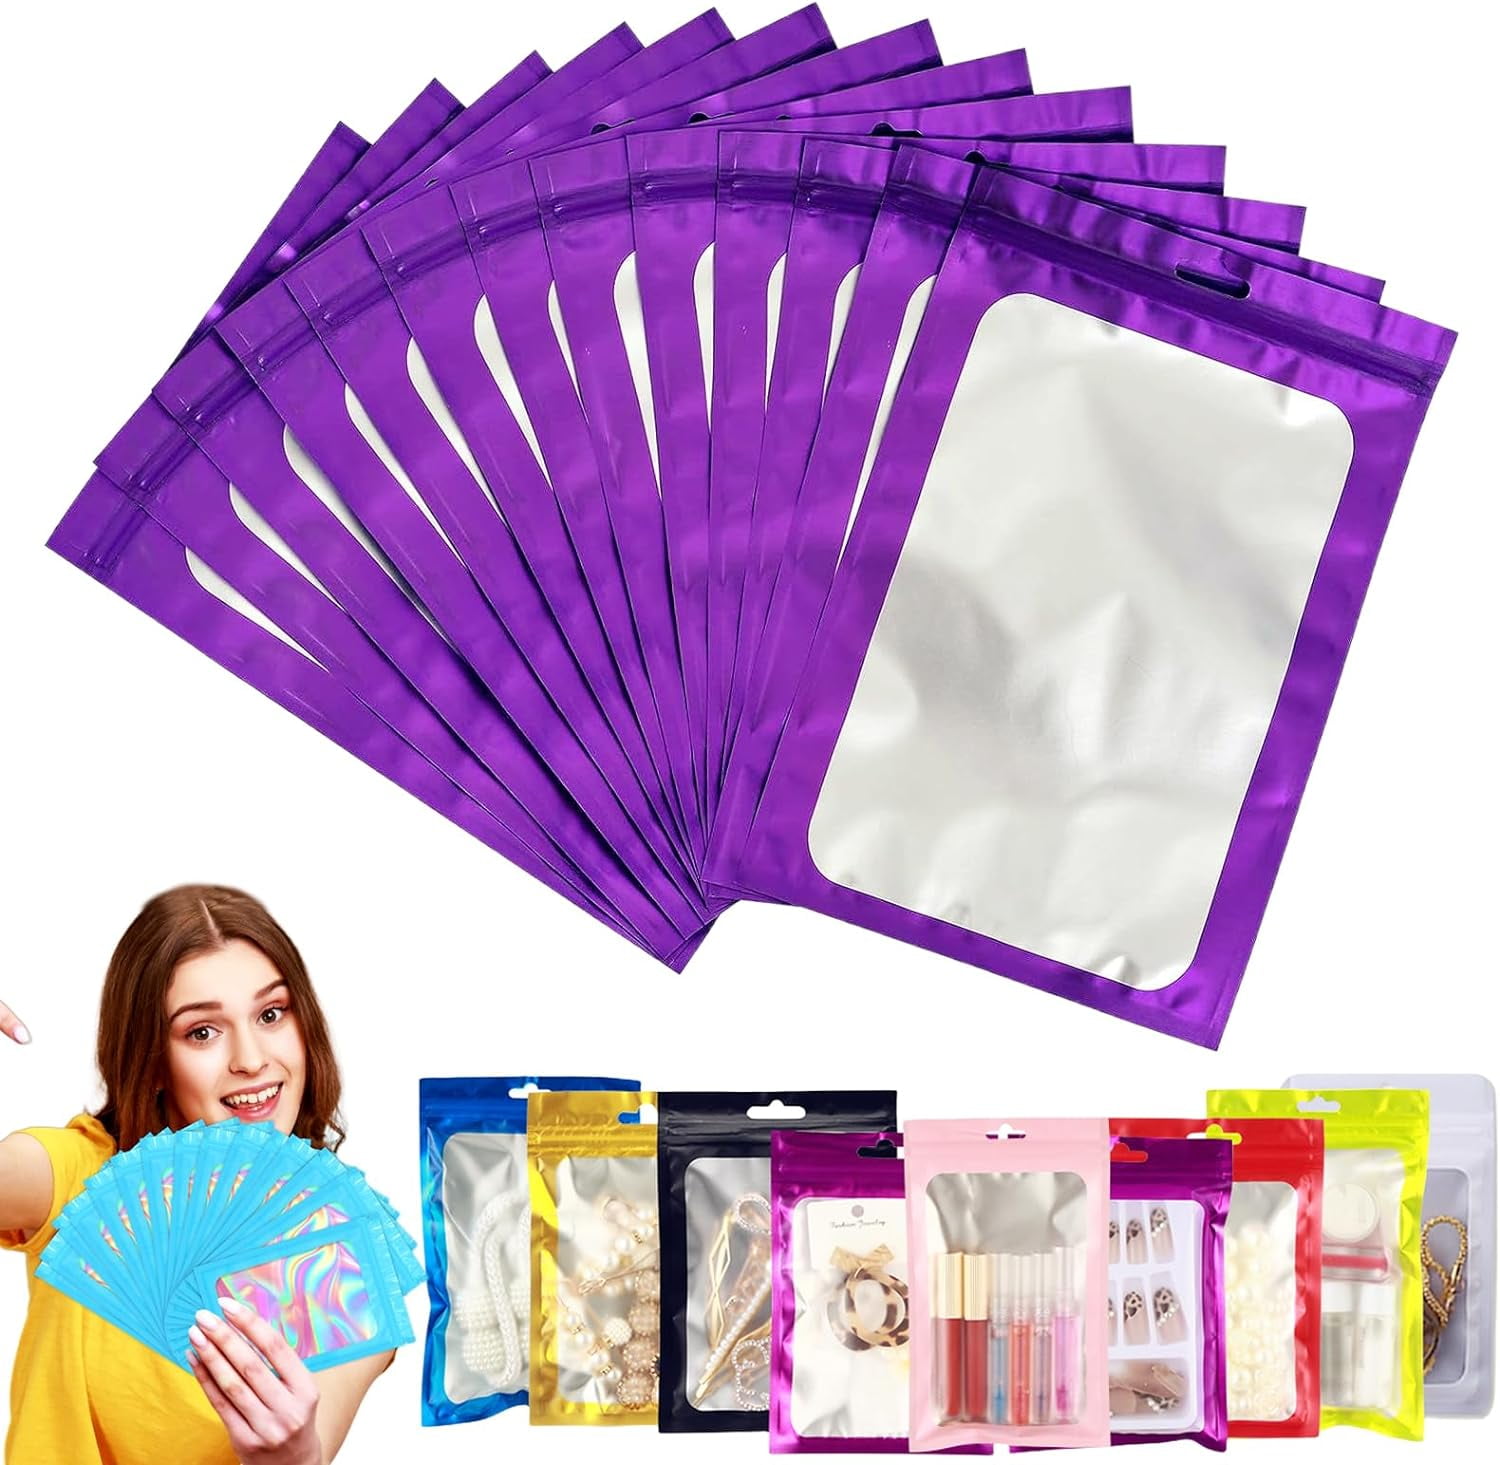 Jewelry Plastic Bags Packaging  Transparent Pouch Jewelry - 20pcs